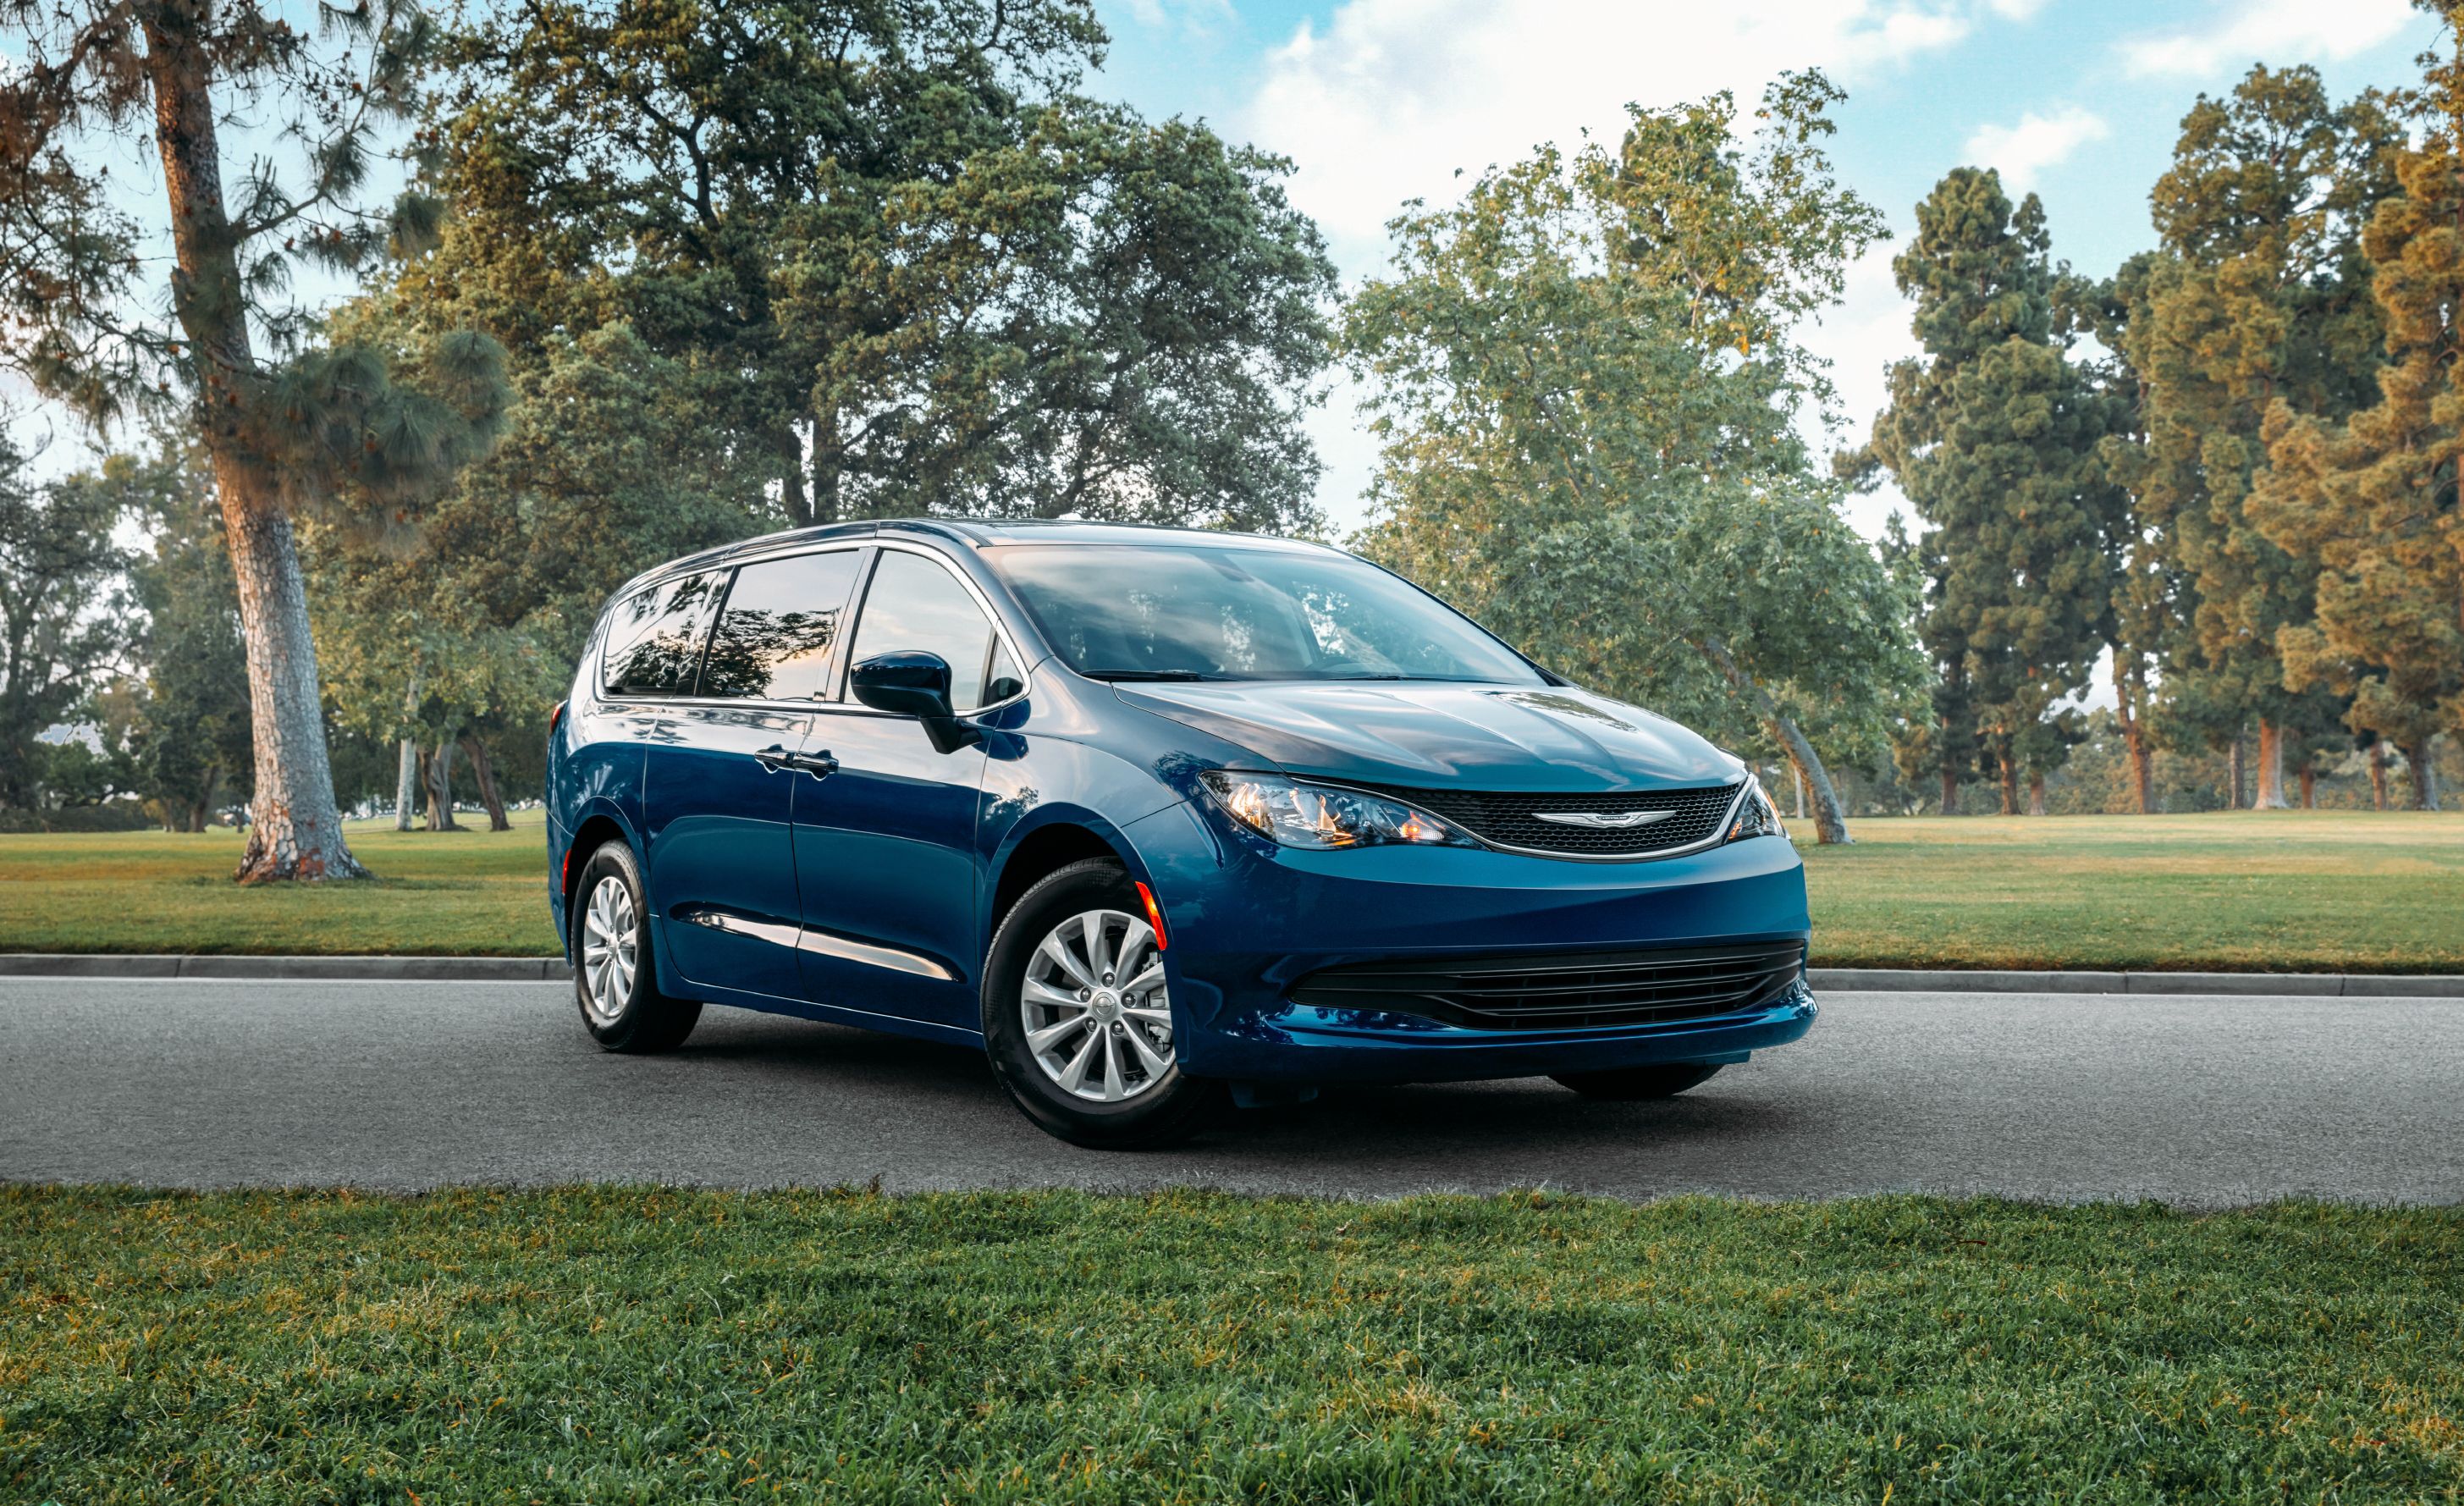 2020 Chrysler Voyager Review, Pricing, and Specs